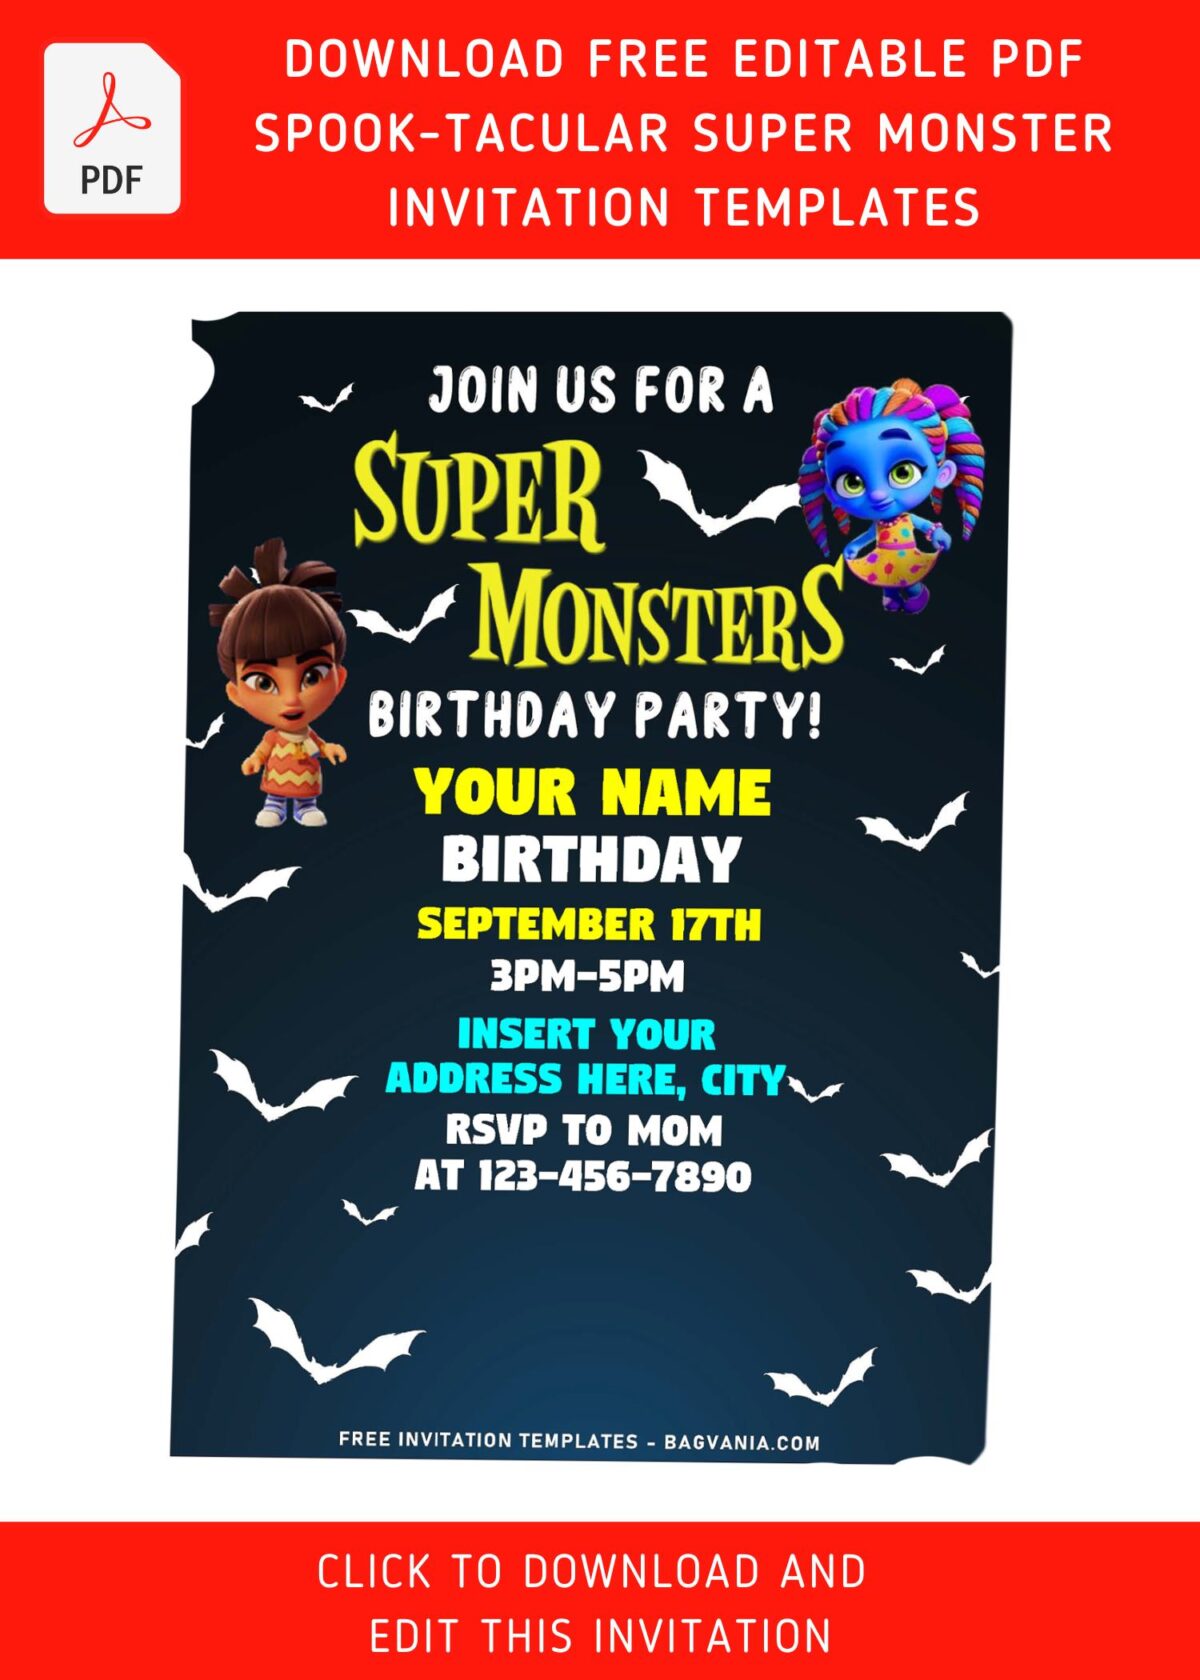 (Free Editable PDF) Spooktacular Super Monster Birthday Invitation Templates with cute Cleo